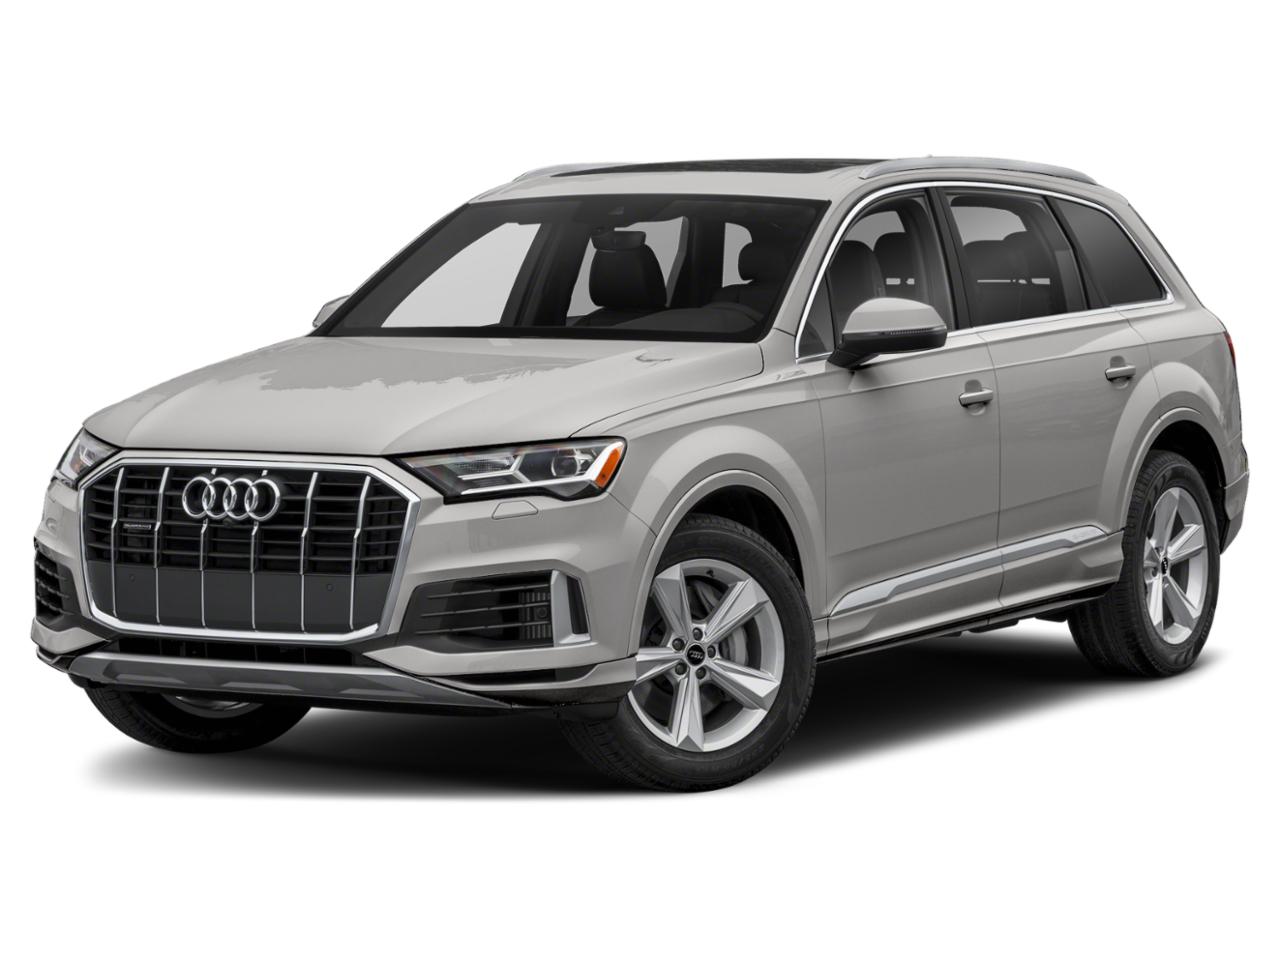 2020 Audi Q7 Vehicle Photo in Willow Grove, PA 19090